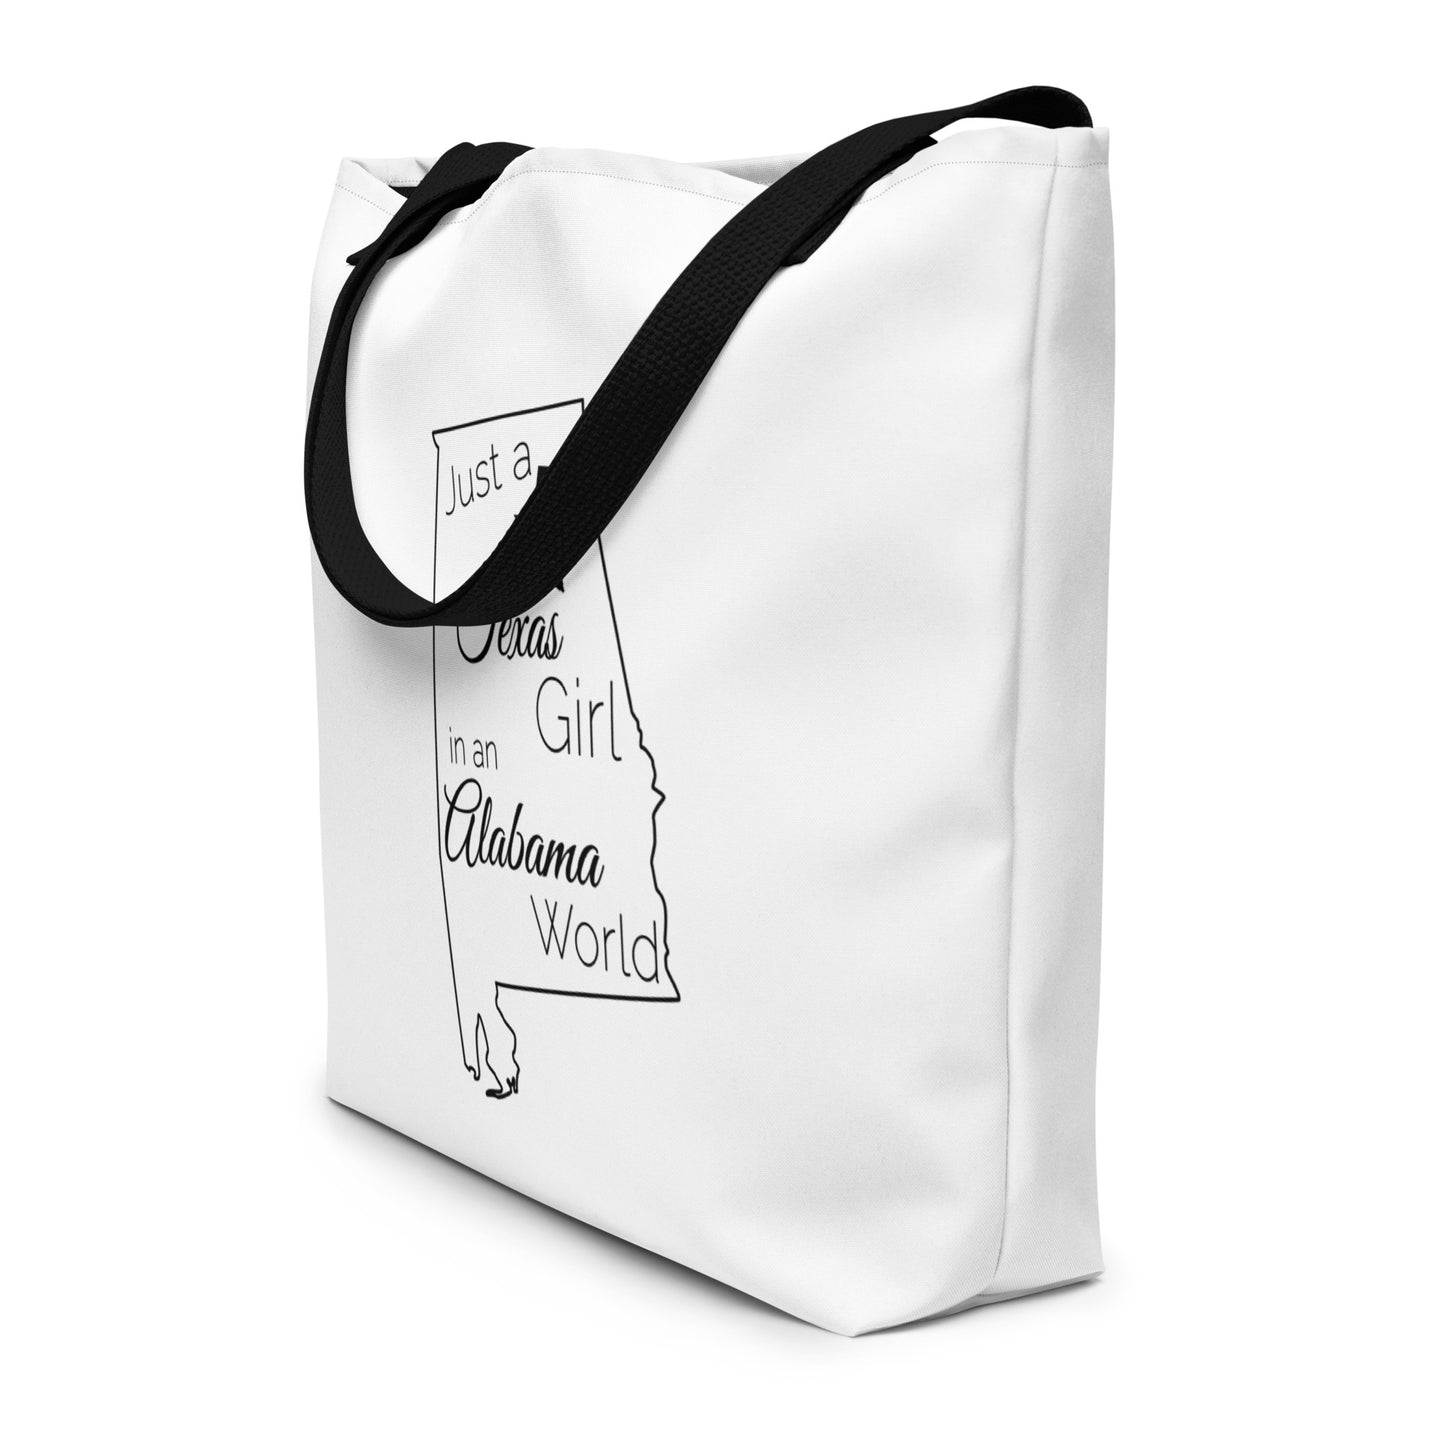 Just a Texas Girl in an Alabama World Large Tote Bag